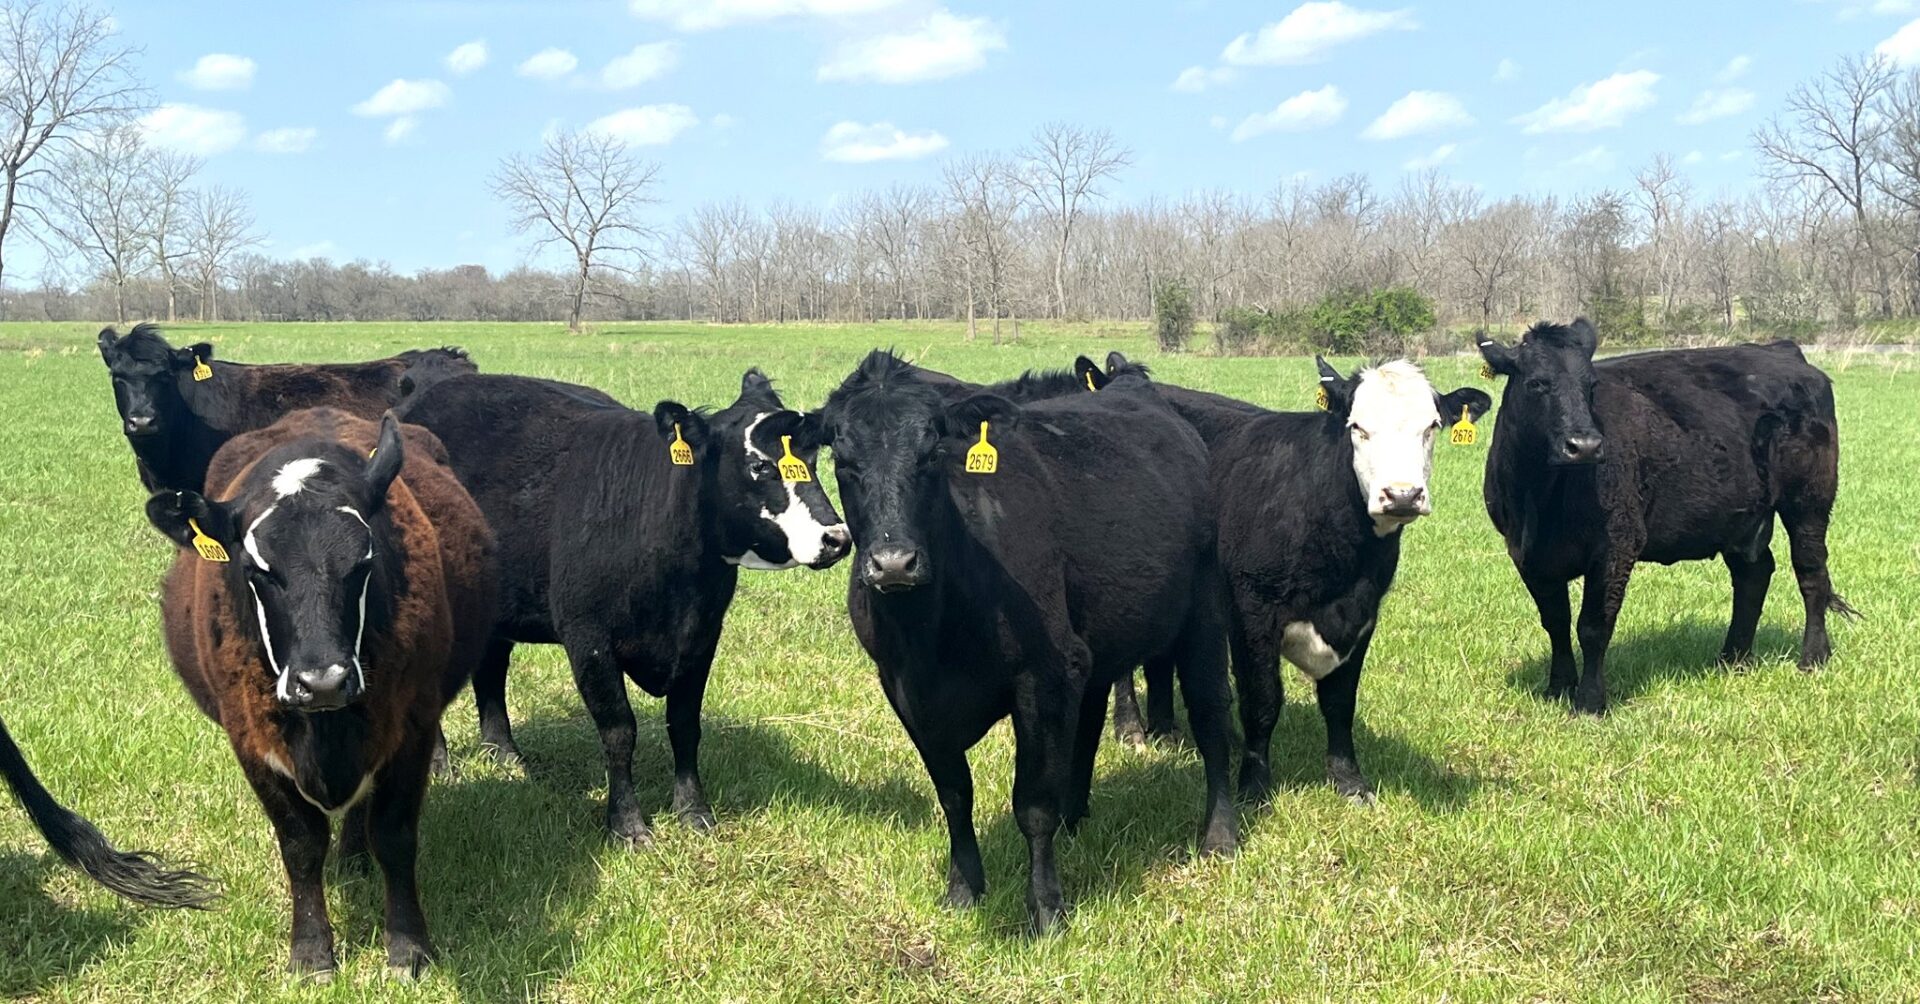 25 Head of Black and Black Baldy Cows